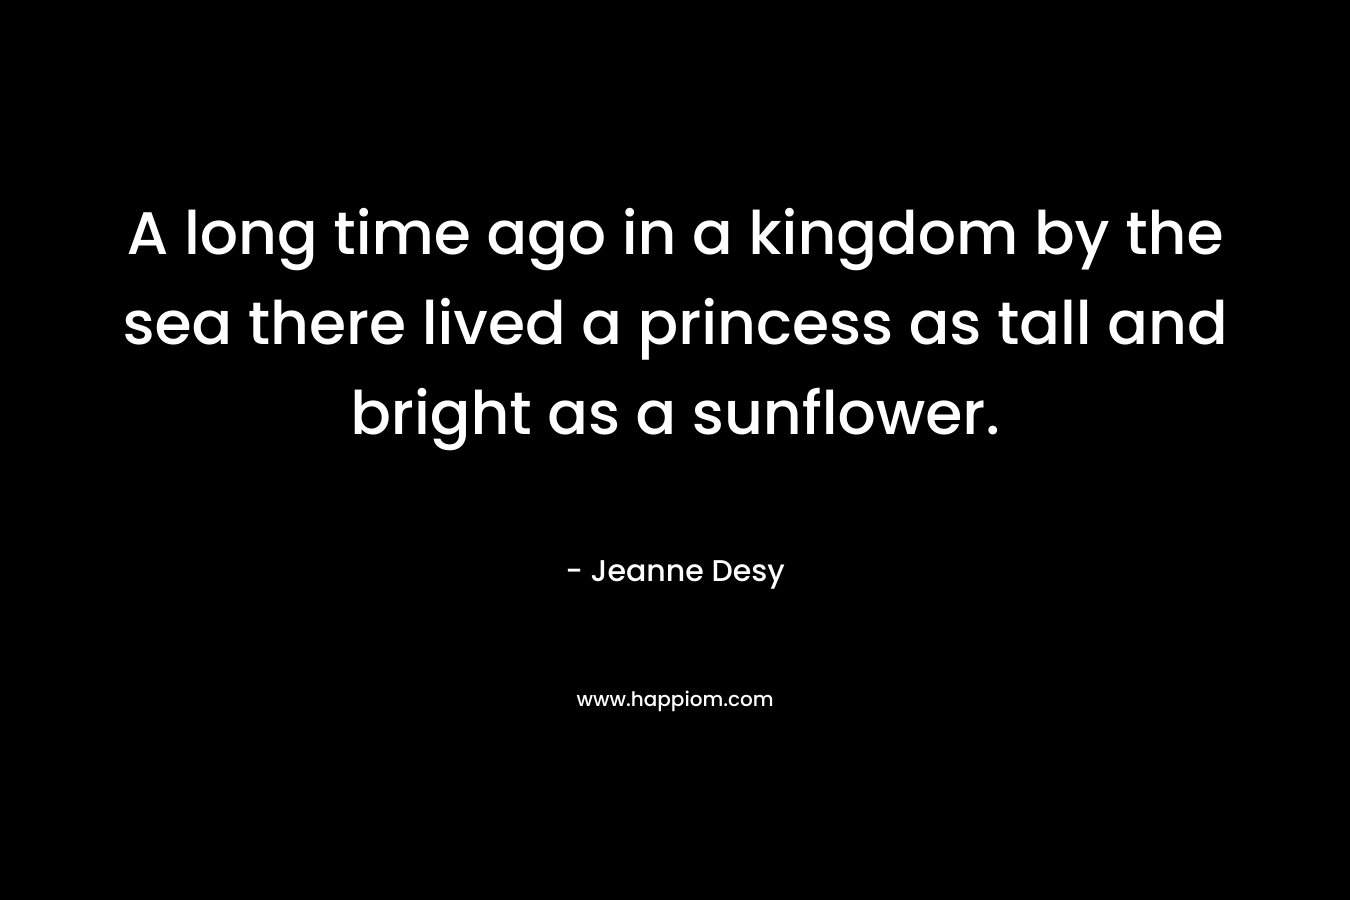 A long time ago in a kingdom by the sea there lived a princess as tall and bright as a sunflower. – Jeanne Desy